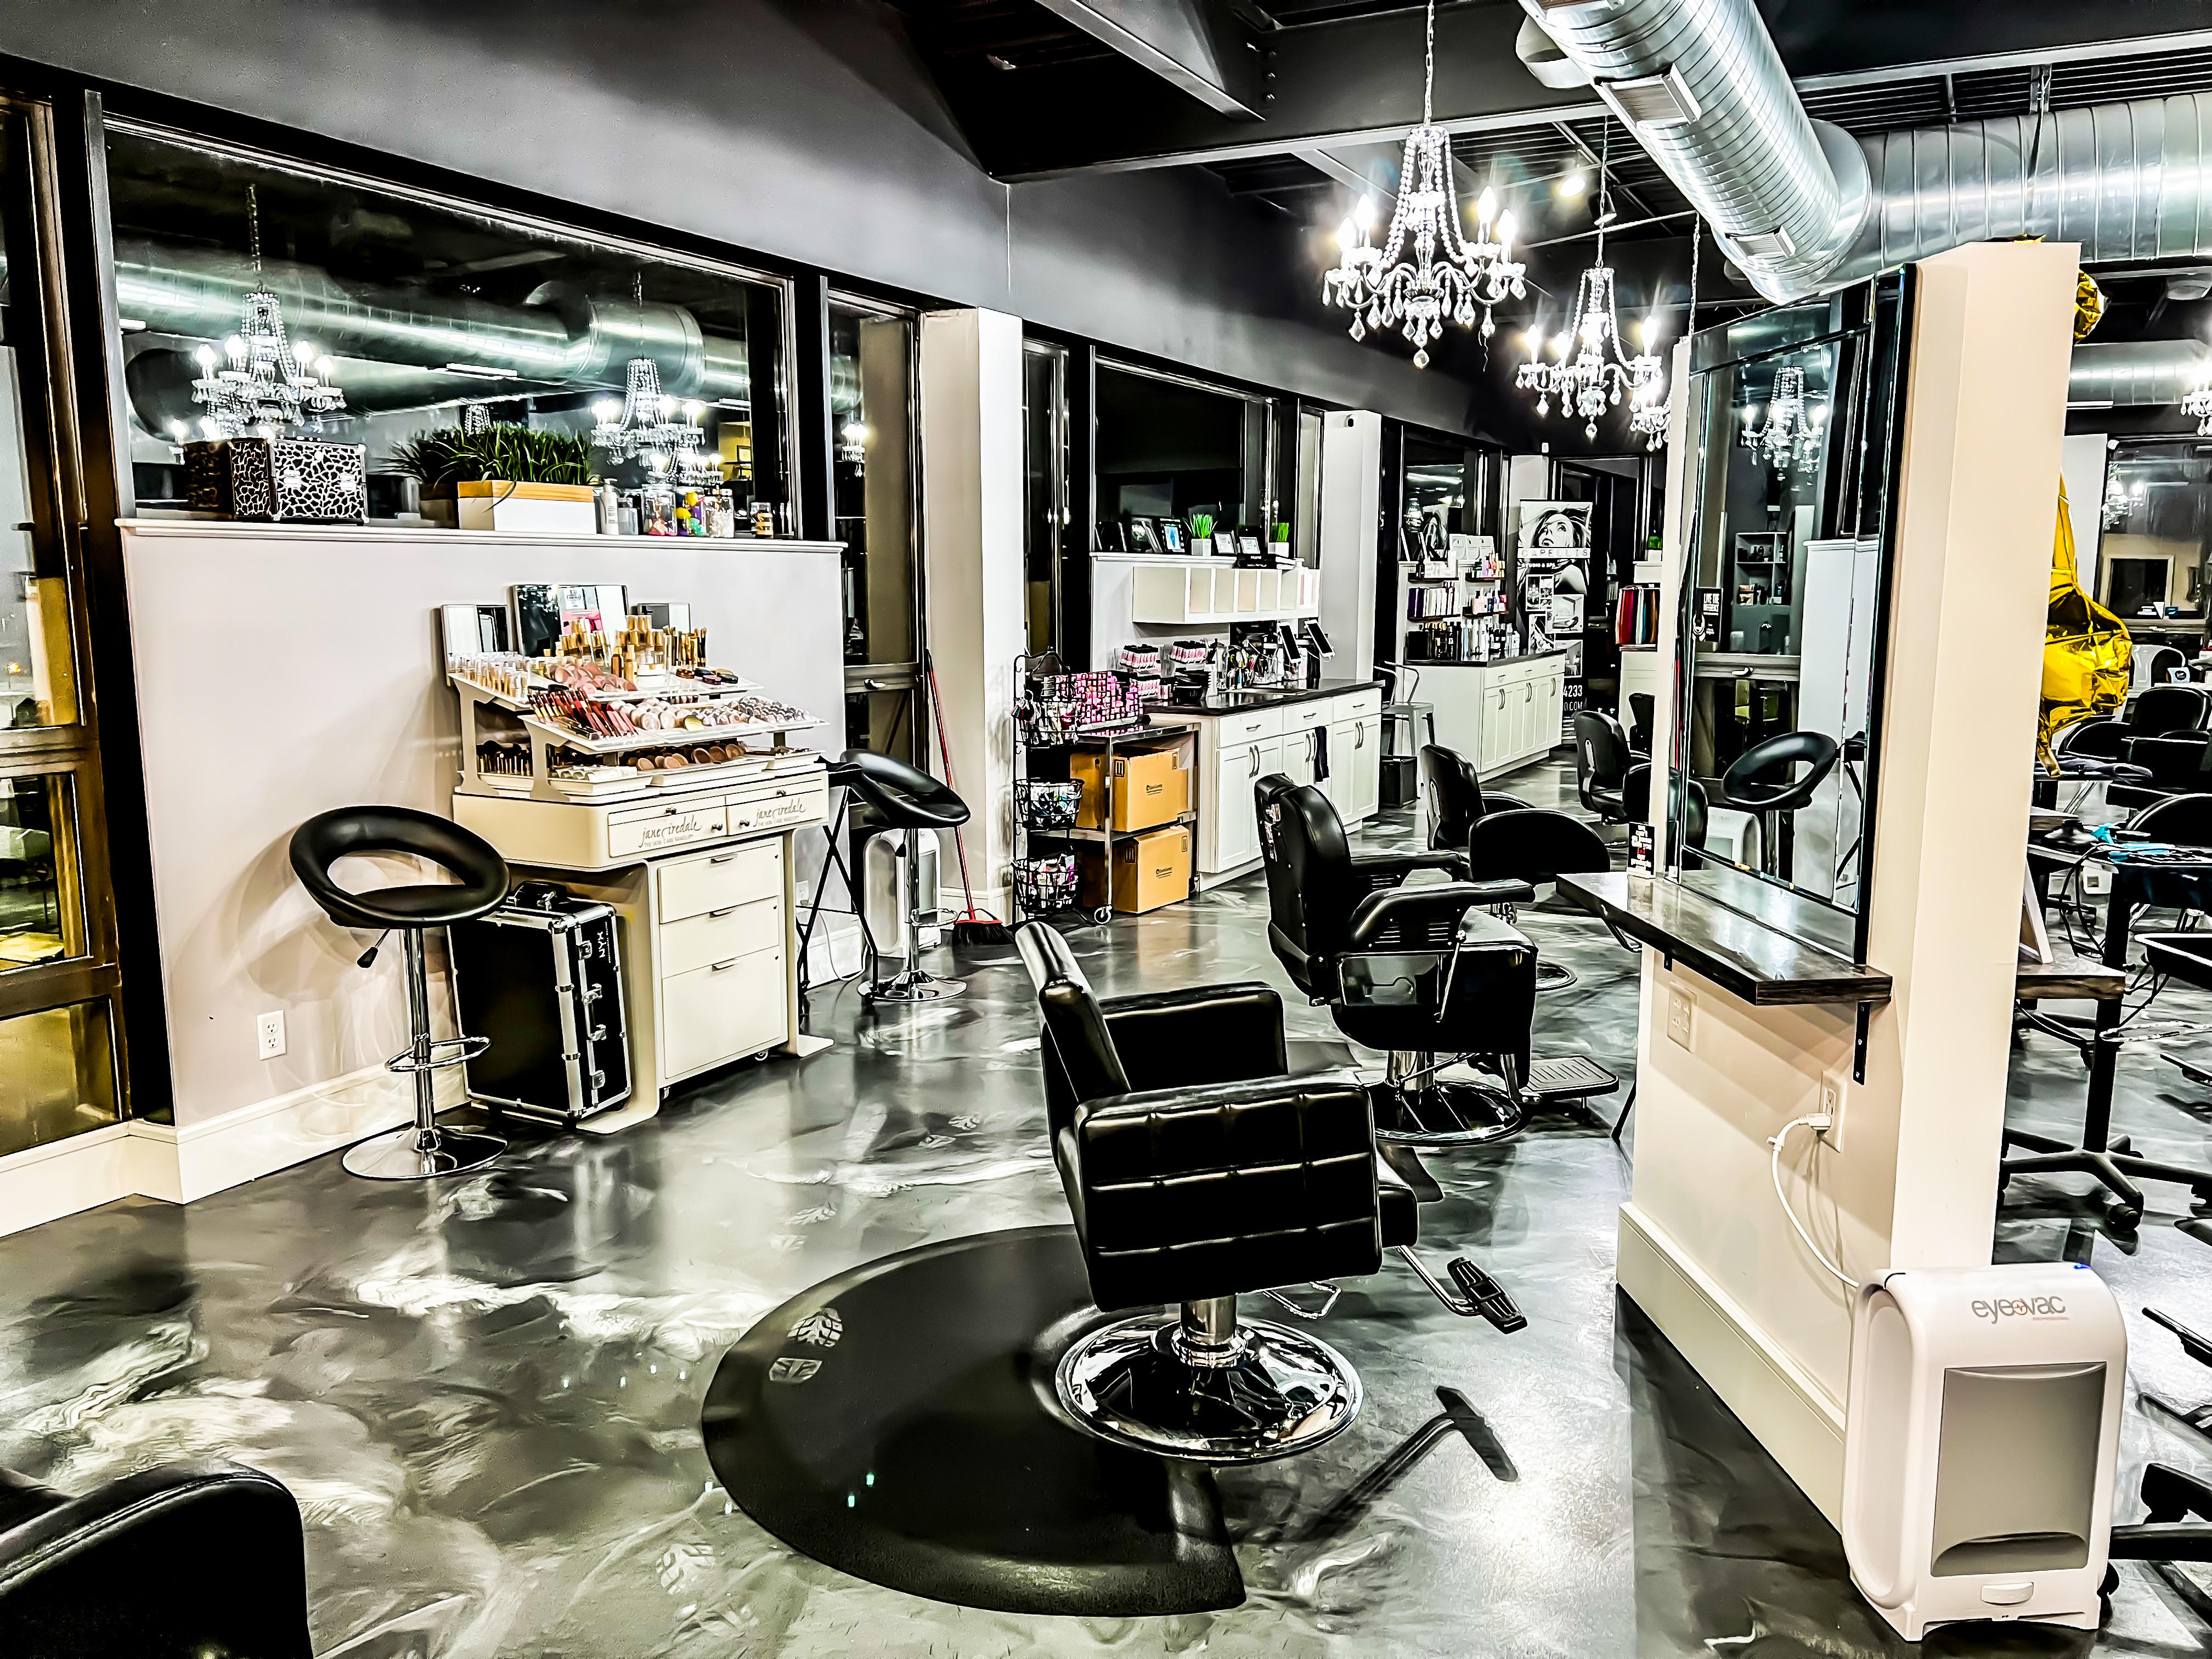 Capelli’s Studio & Spa guests may choose their service provider at a level that best compliments their requests and needs while also honoring their budget.